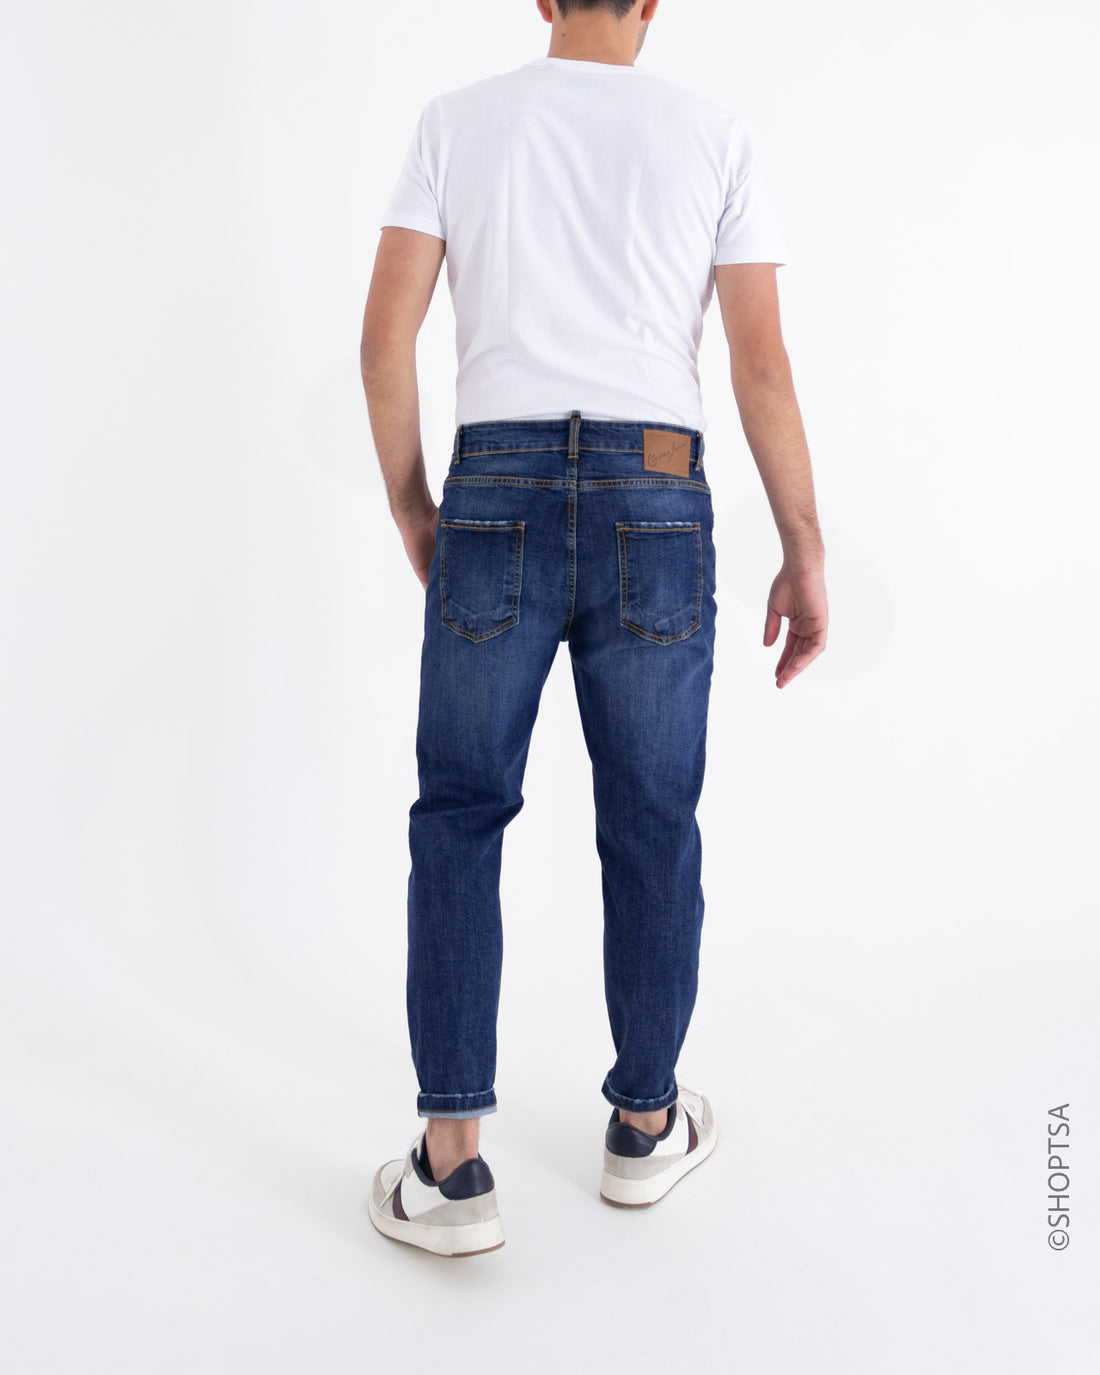 Dark carrot jeans - Cliver Jeans